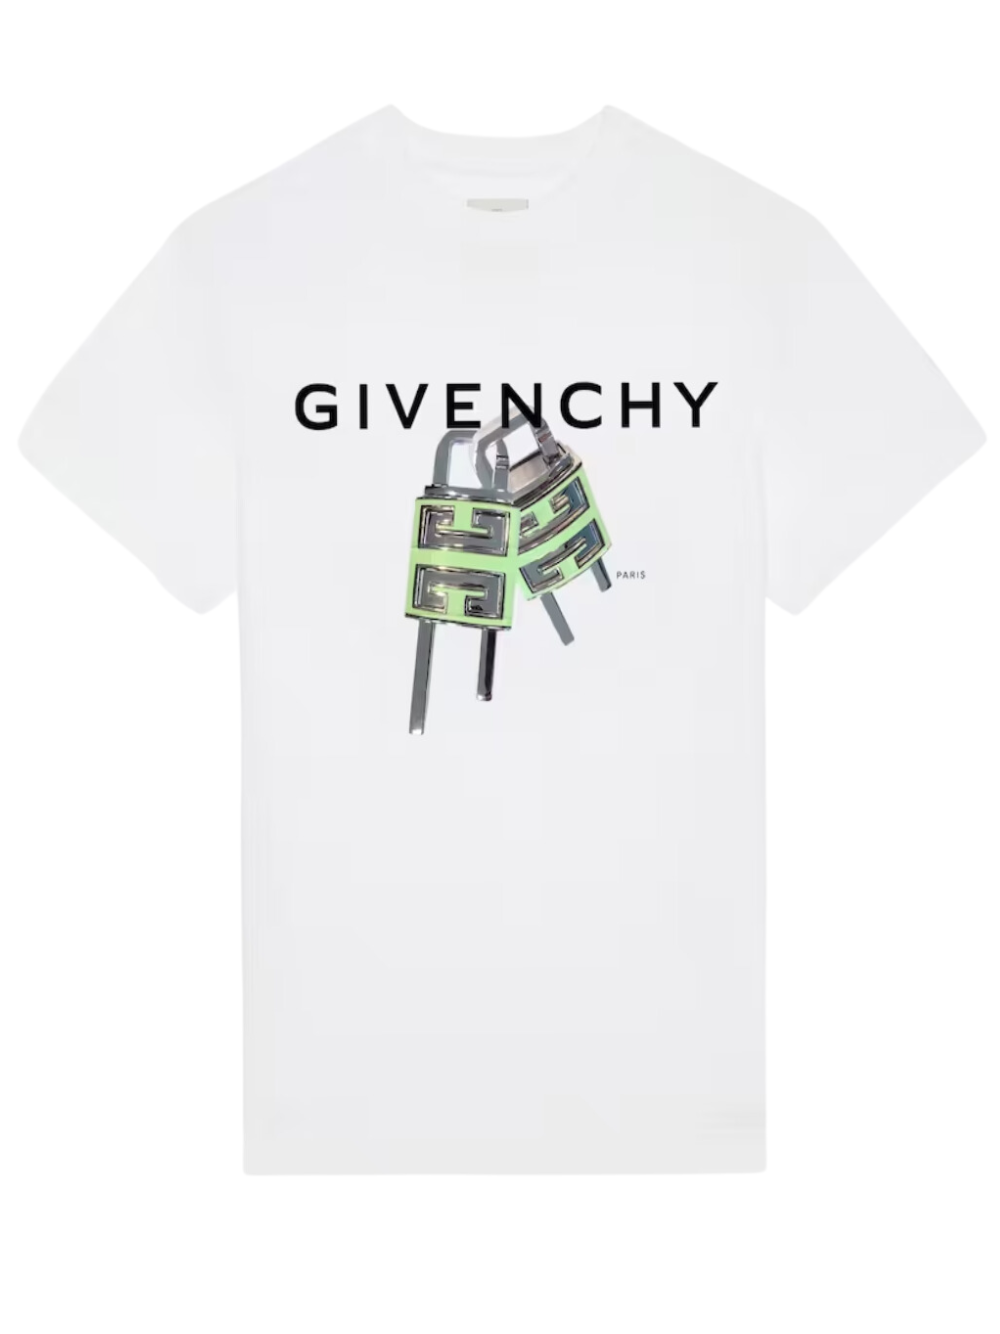 Givenchy 4G Lock T-Shirt White Slim Fit | Hype Vault Kuala Lumpur | Asia's Top Trusted High-End Sneakers and Streetwear Store | Guaranteed 100% authentic